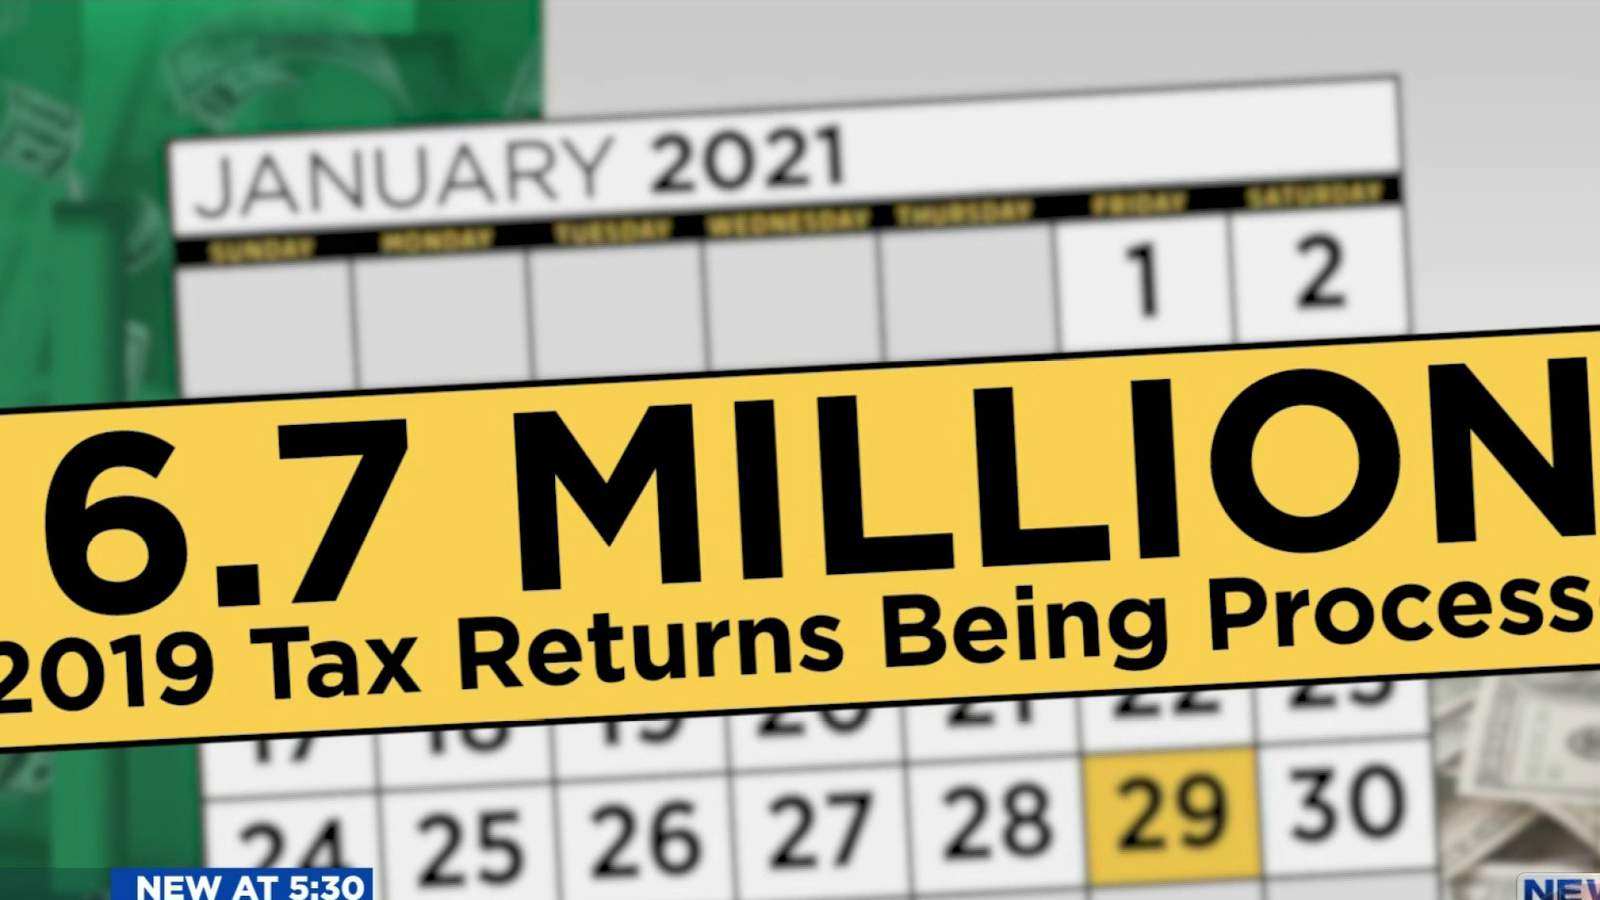 Retired medical supervisor one of millions still waiting for 2019 tax refund